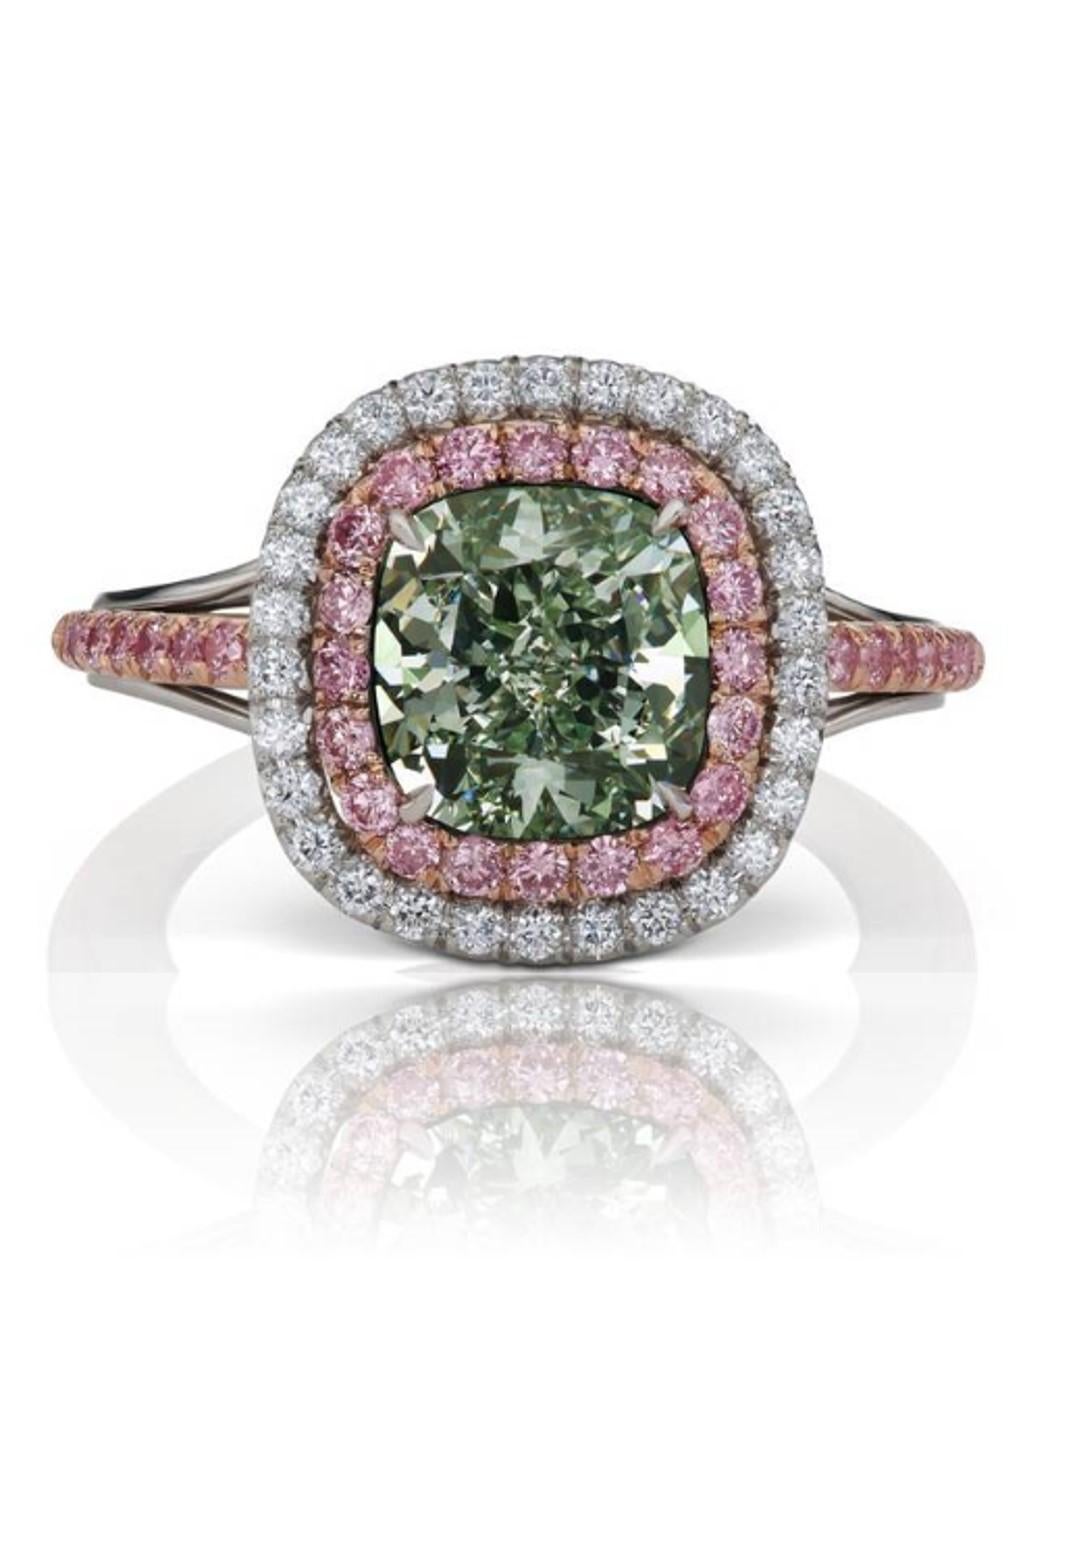 Incredible Deal on GIA Certified 2.44 Carat Cushion Cut, Natural Fancy Green Even I1, Diamond Ring, measuring 7.66-7.26x5.05. Total Carat Weight on the ring is 2.94.
GIA CERTIFICATE #2228474095.  
This incredible setting was custom made to fit this